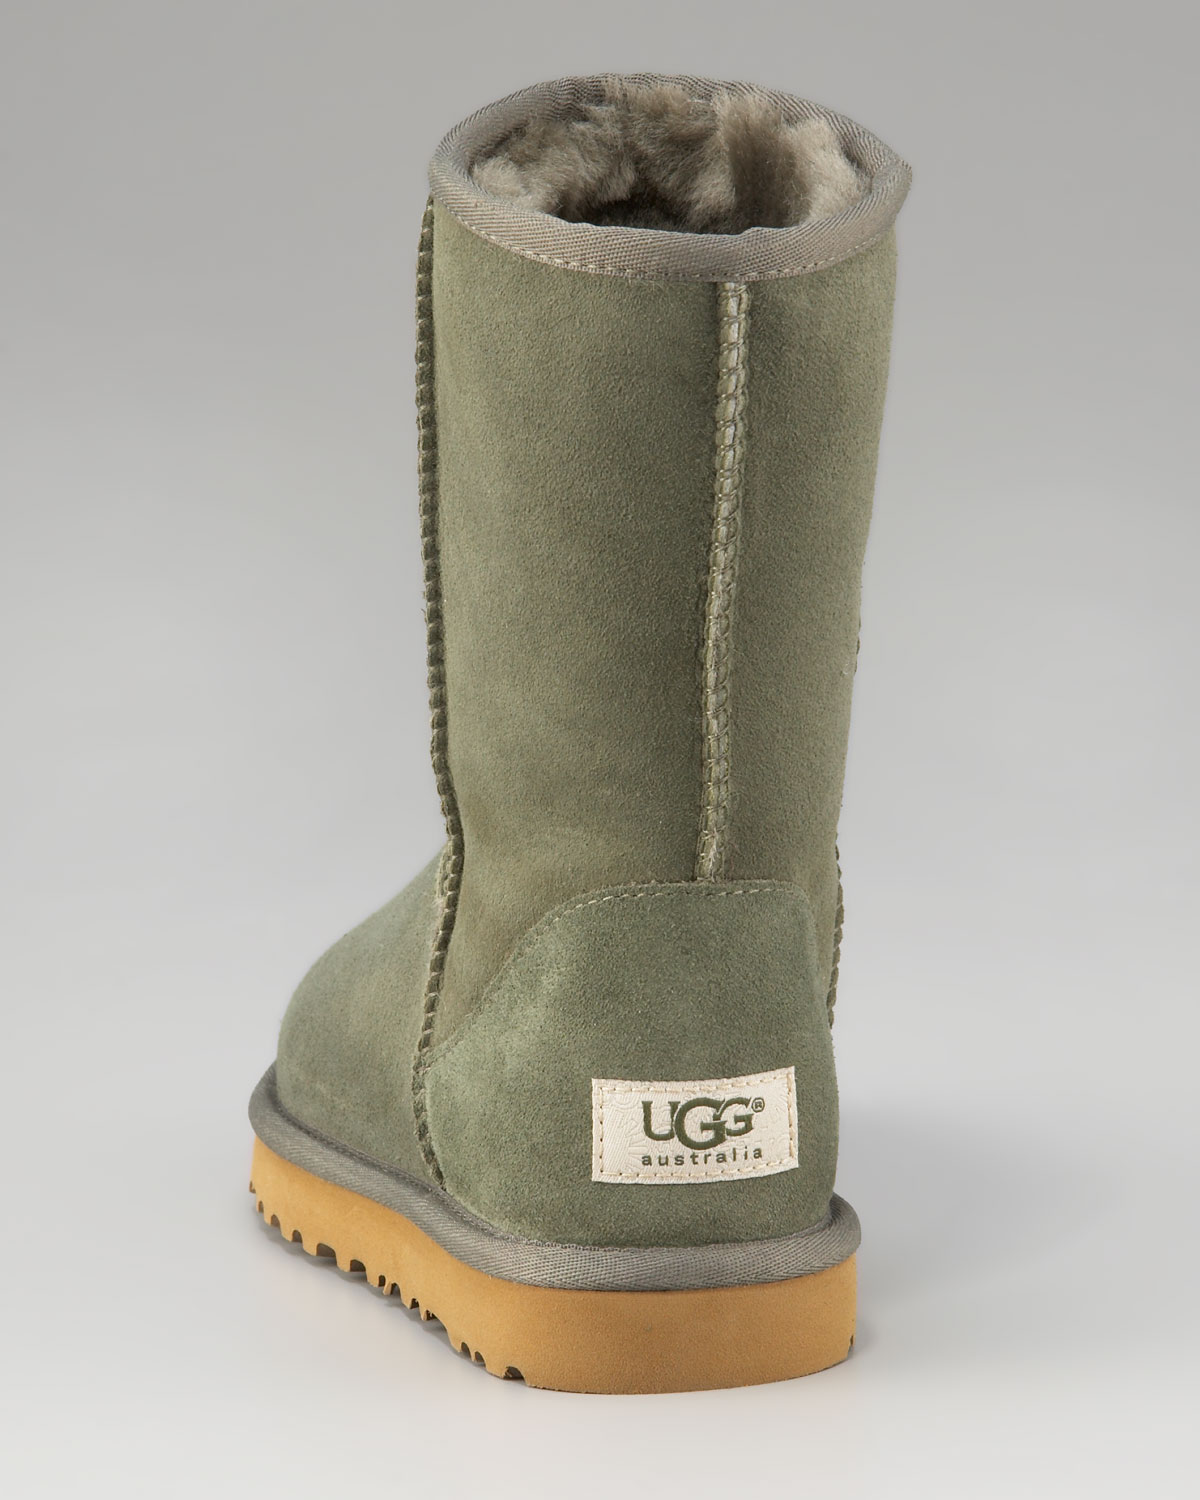 olive green uggs classic short